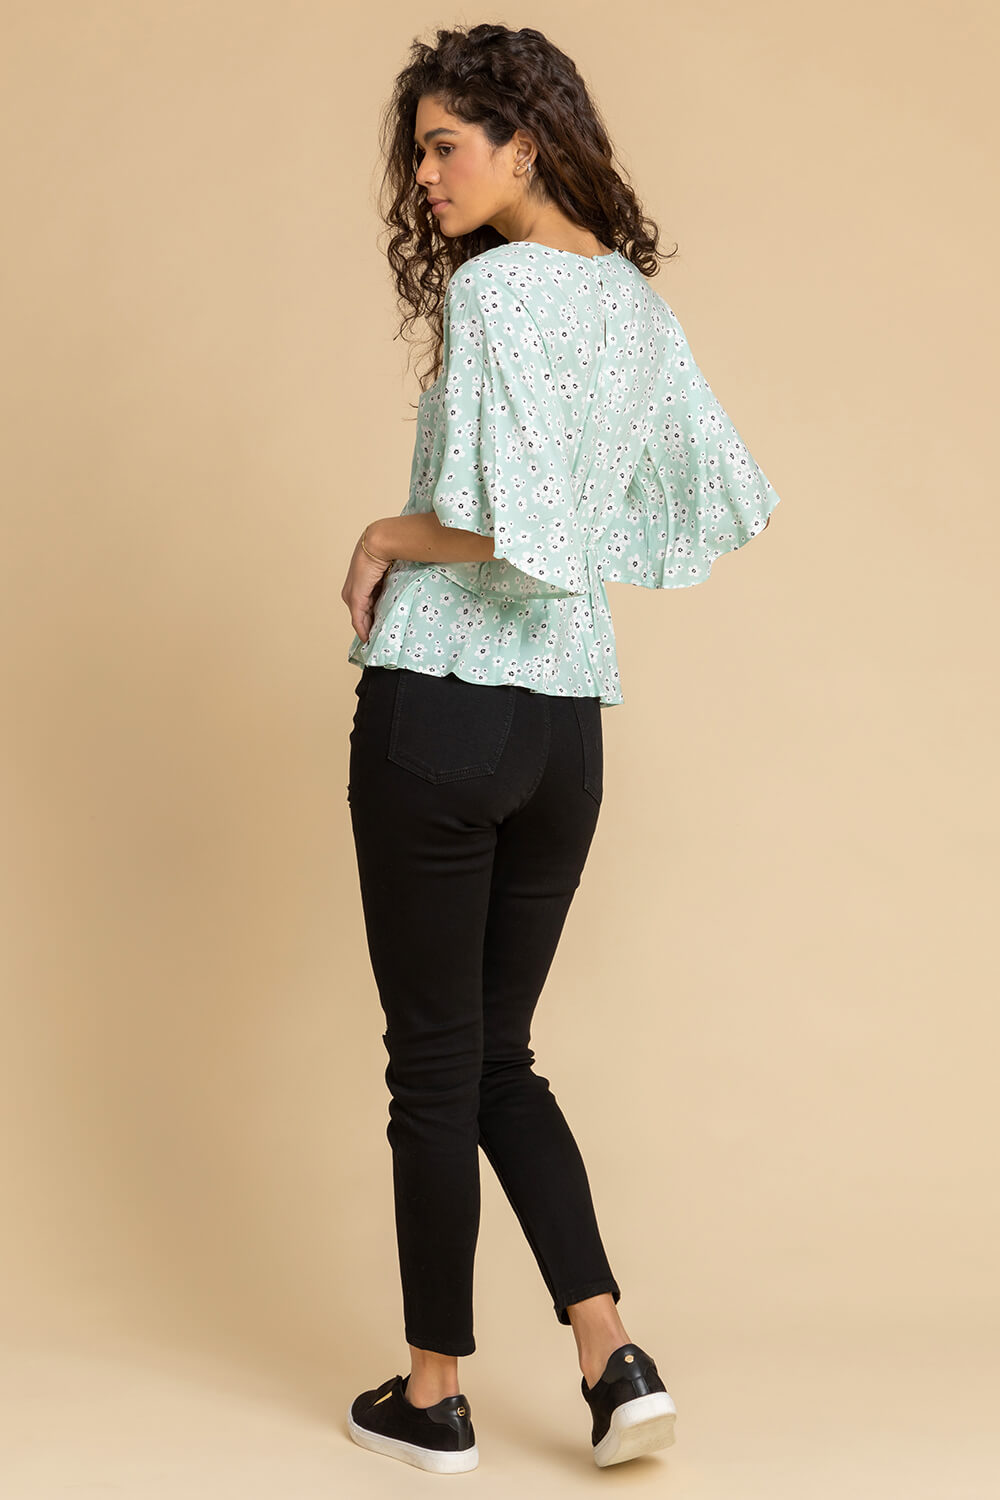 Mint Ditsy Floral Print Peplum Top, Image 2 of 5